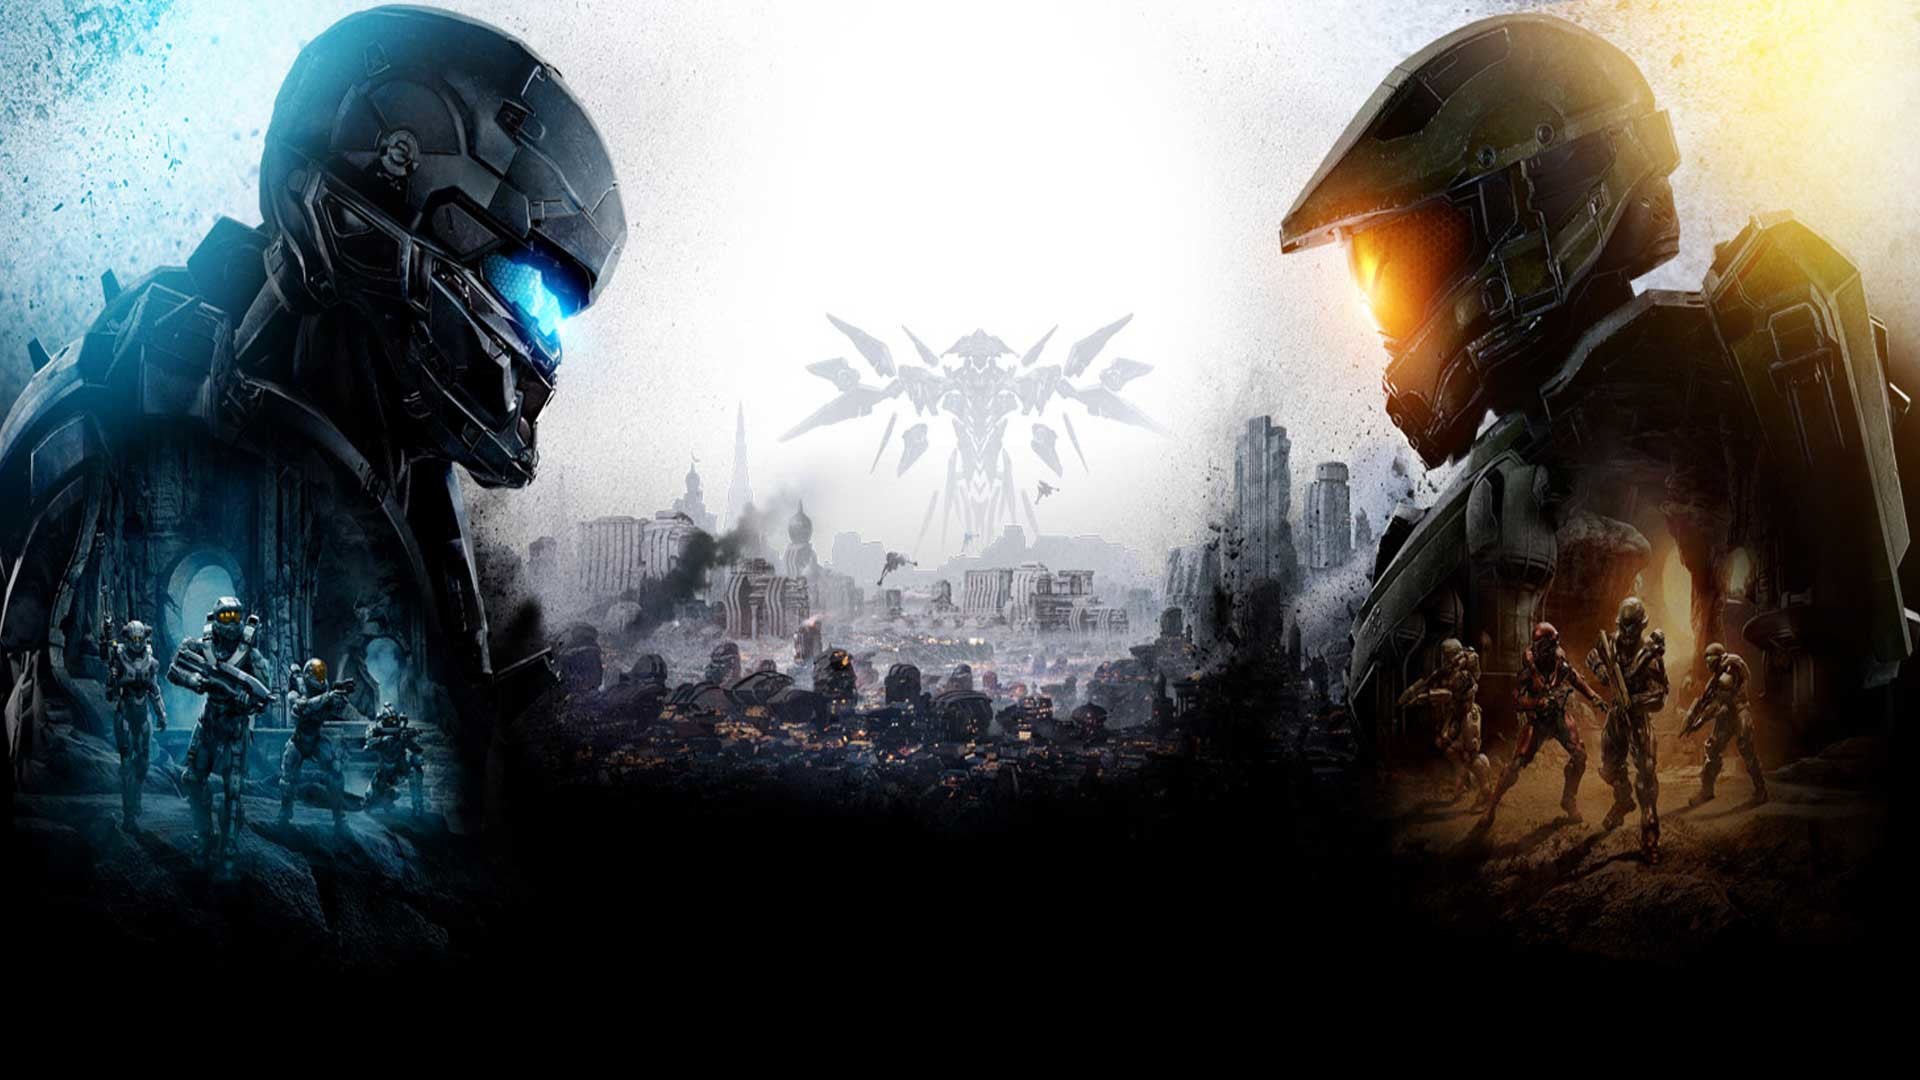 Halo 5 Free Hd Wallpapers Download Data-src - Halo 5 Guardians - 1920x1080  Wallpaper 